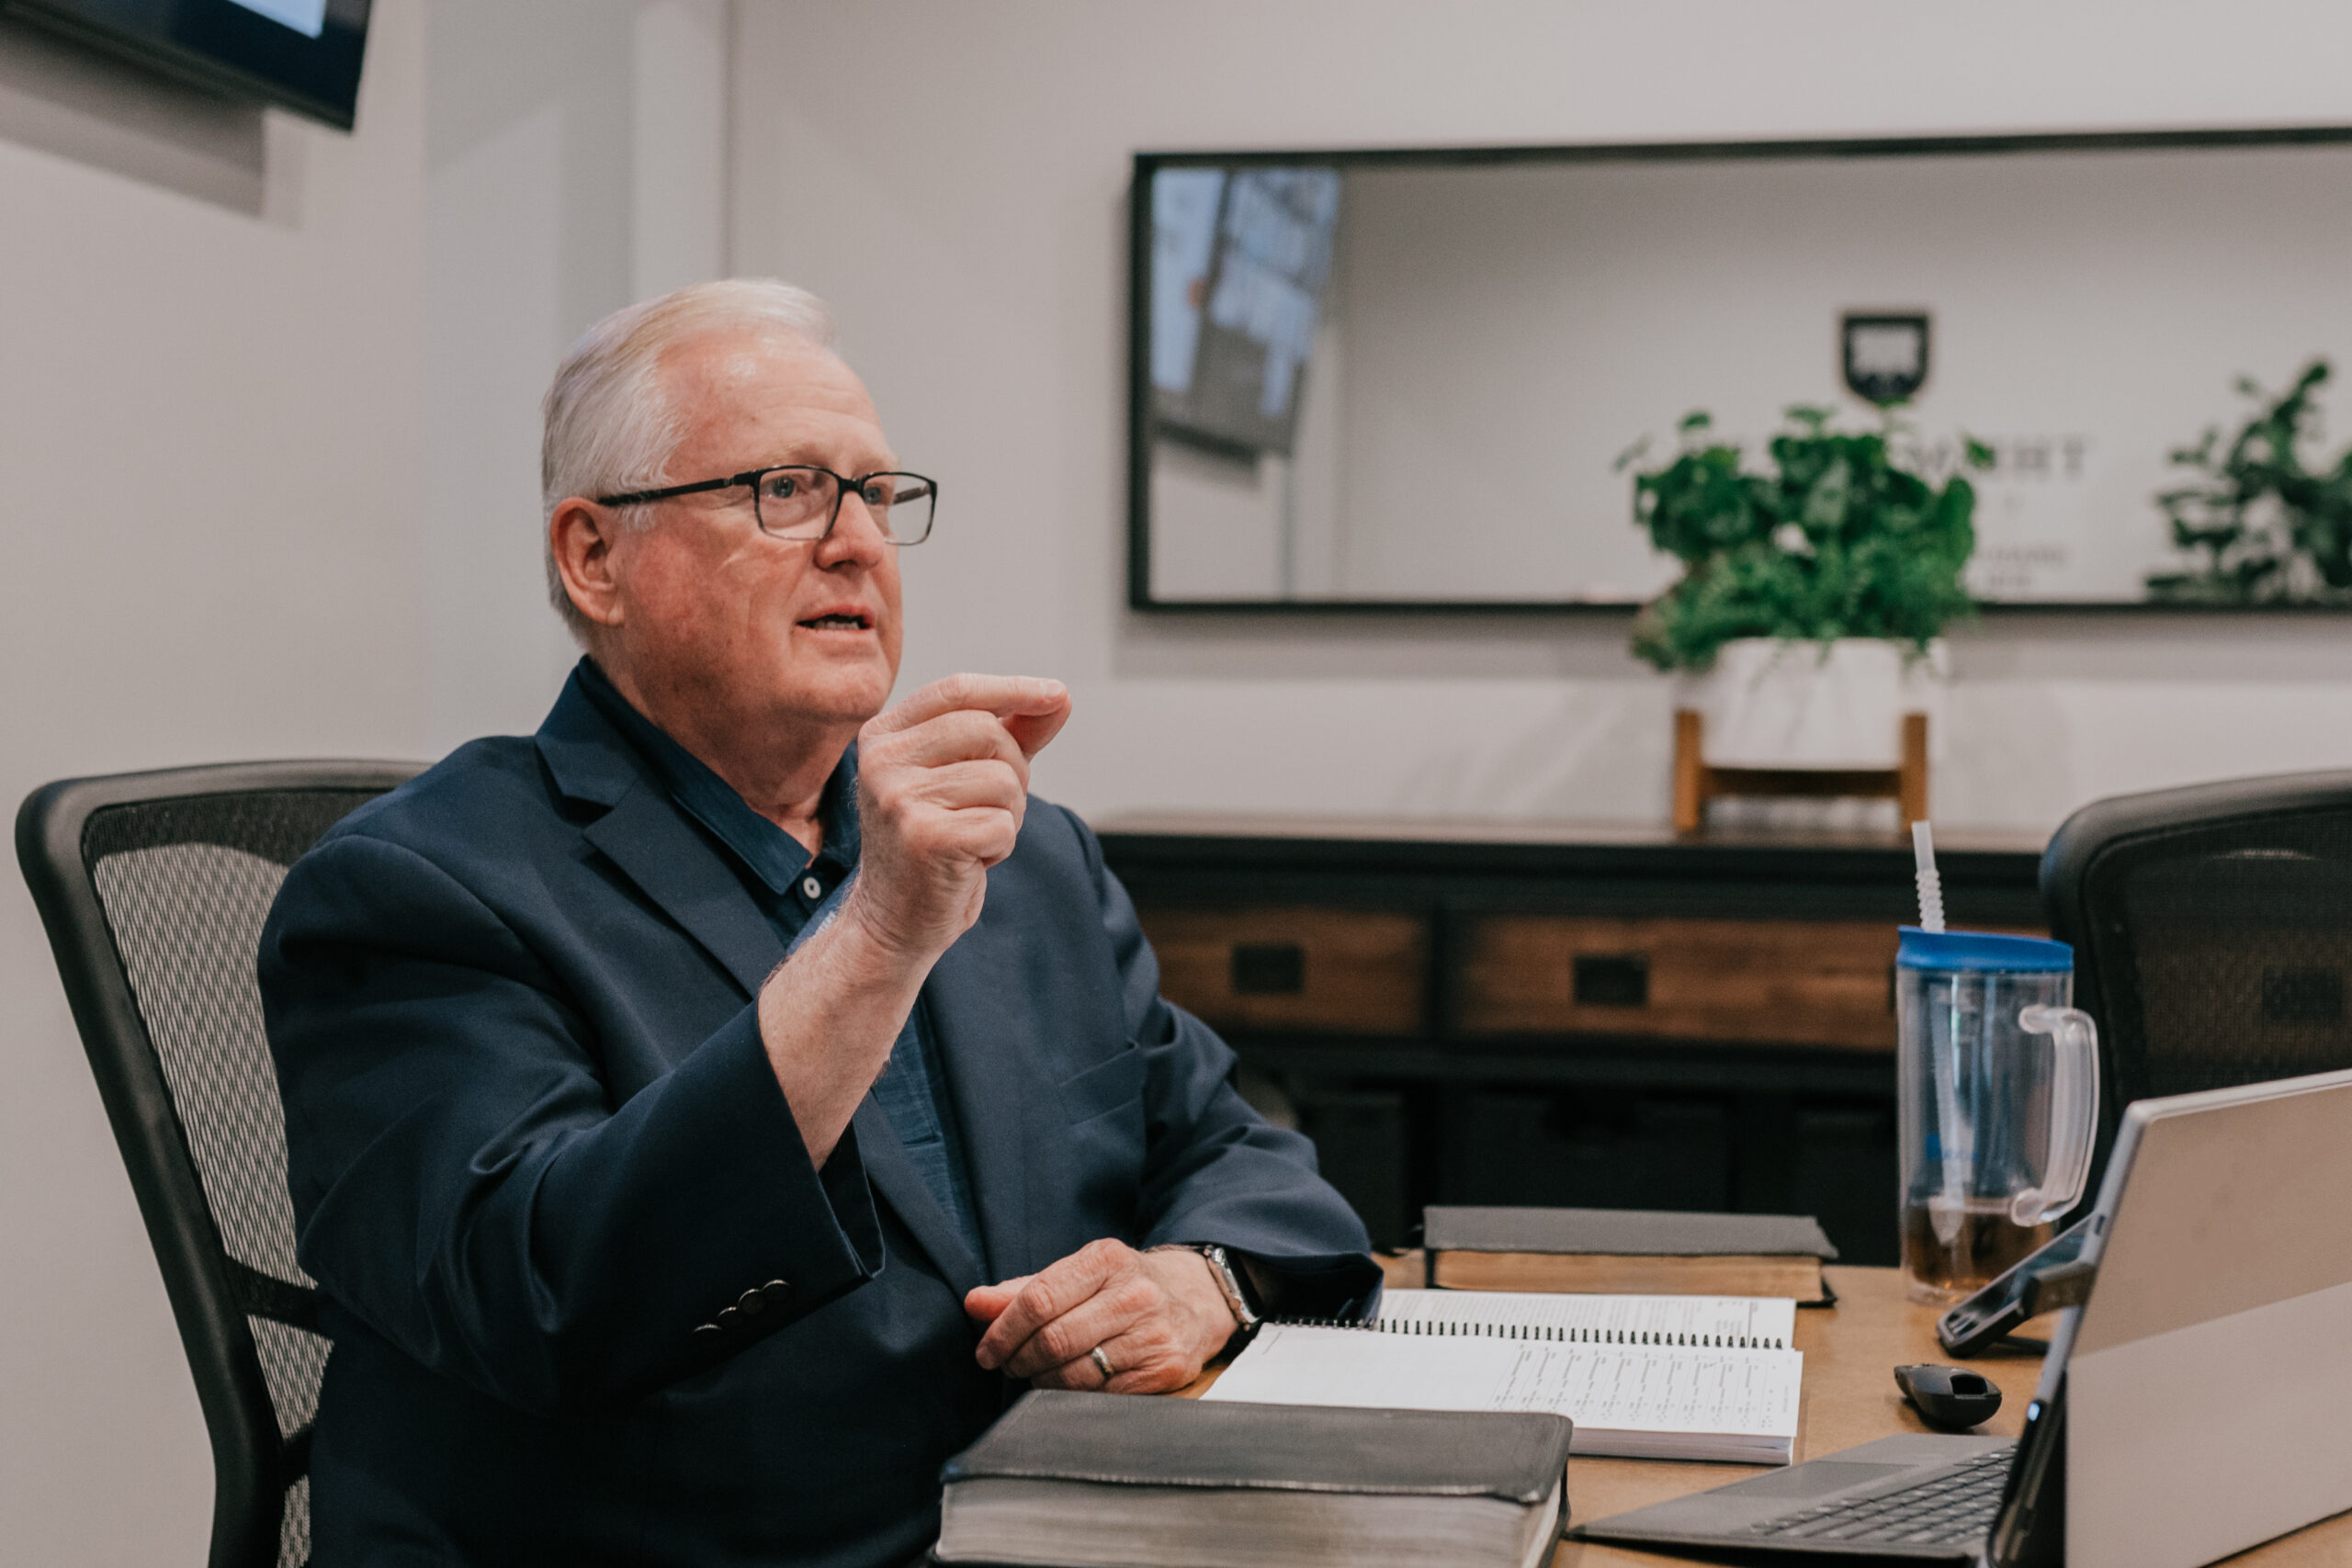 TMU Planning To Launch Doctor of Ministry In Biblical Counseling